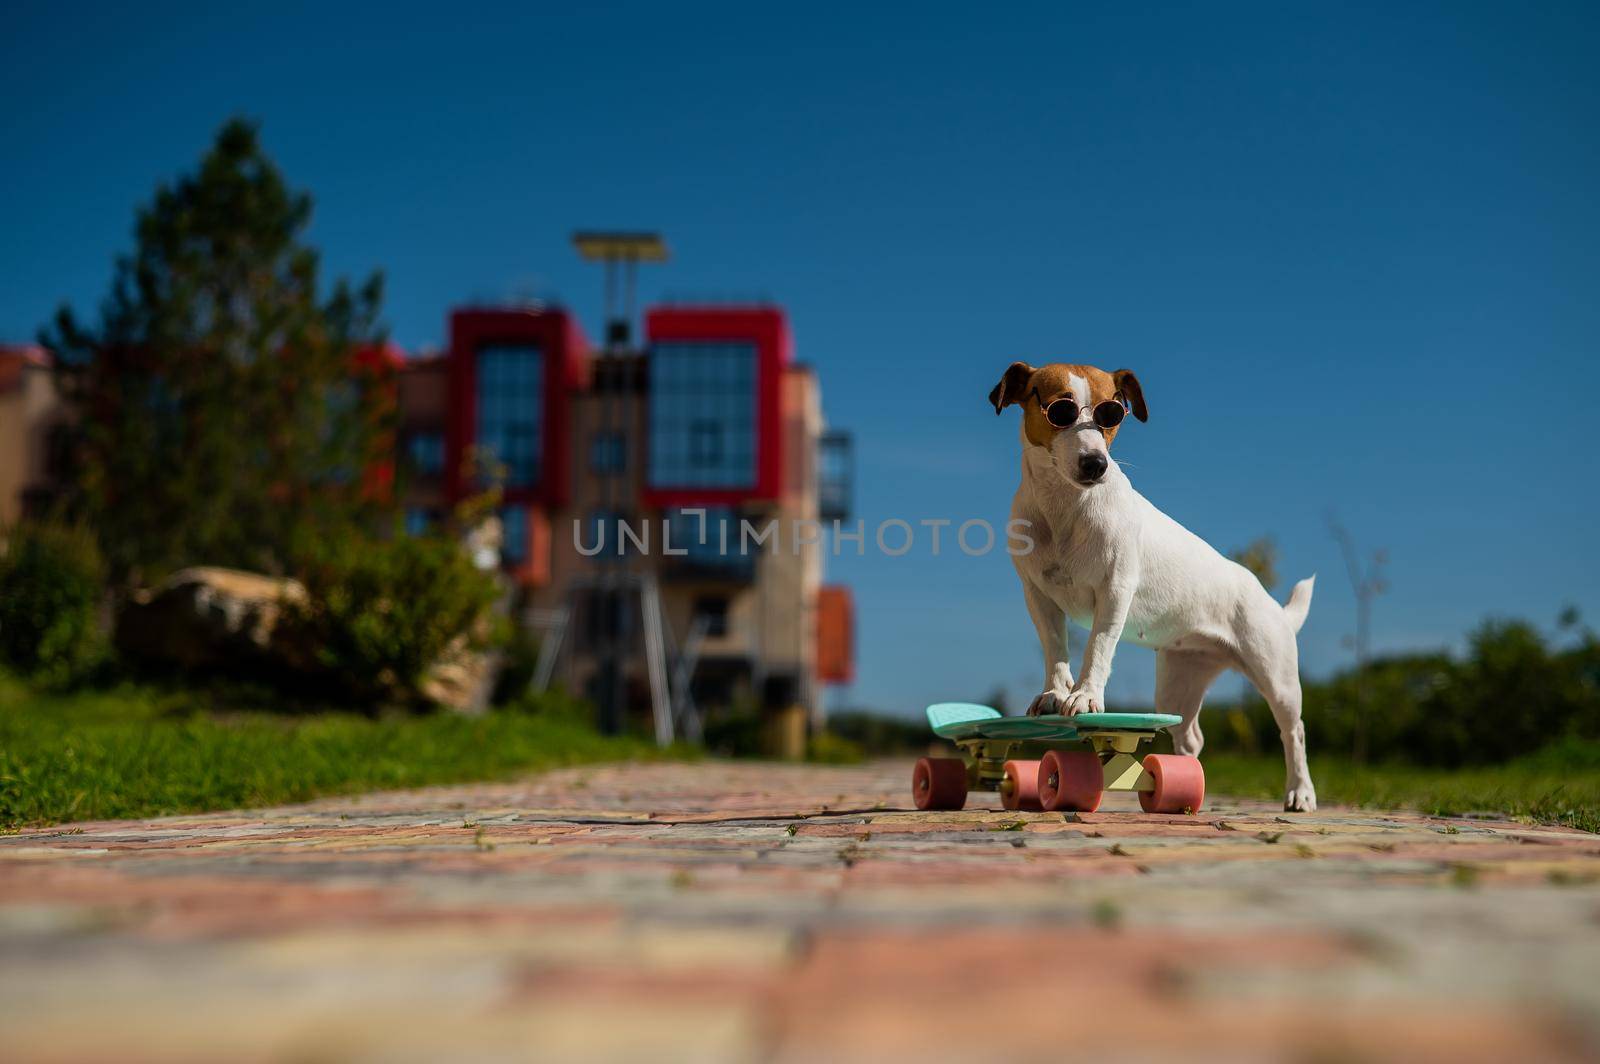 Jack russell terrier dog in sunglasses rides a penny board outdoors. by mrwed54